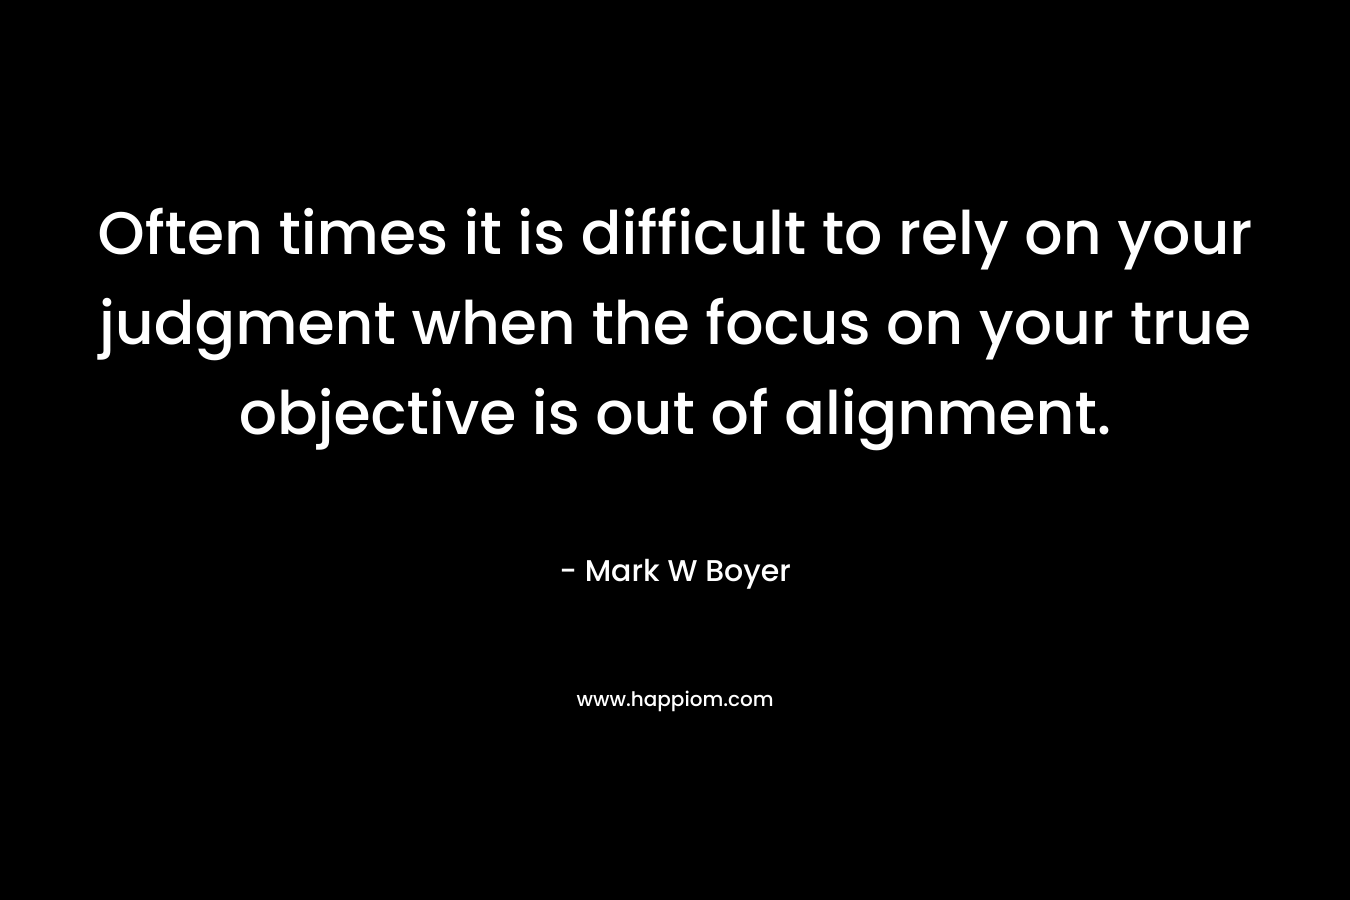 Often times it is difficult to rely on your judgment when the focus on your true objective is out of alignment. – Mark W Boyer